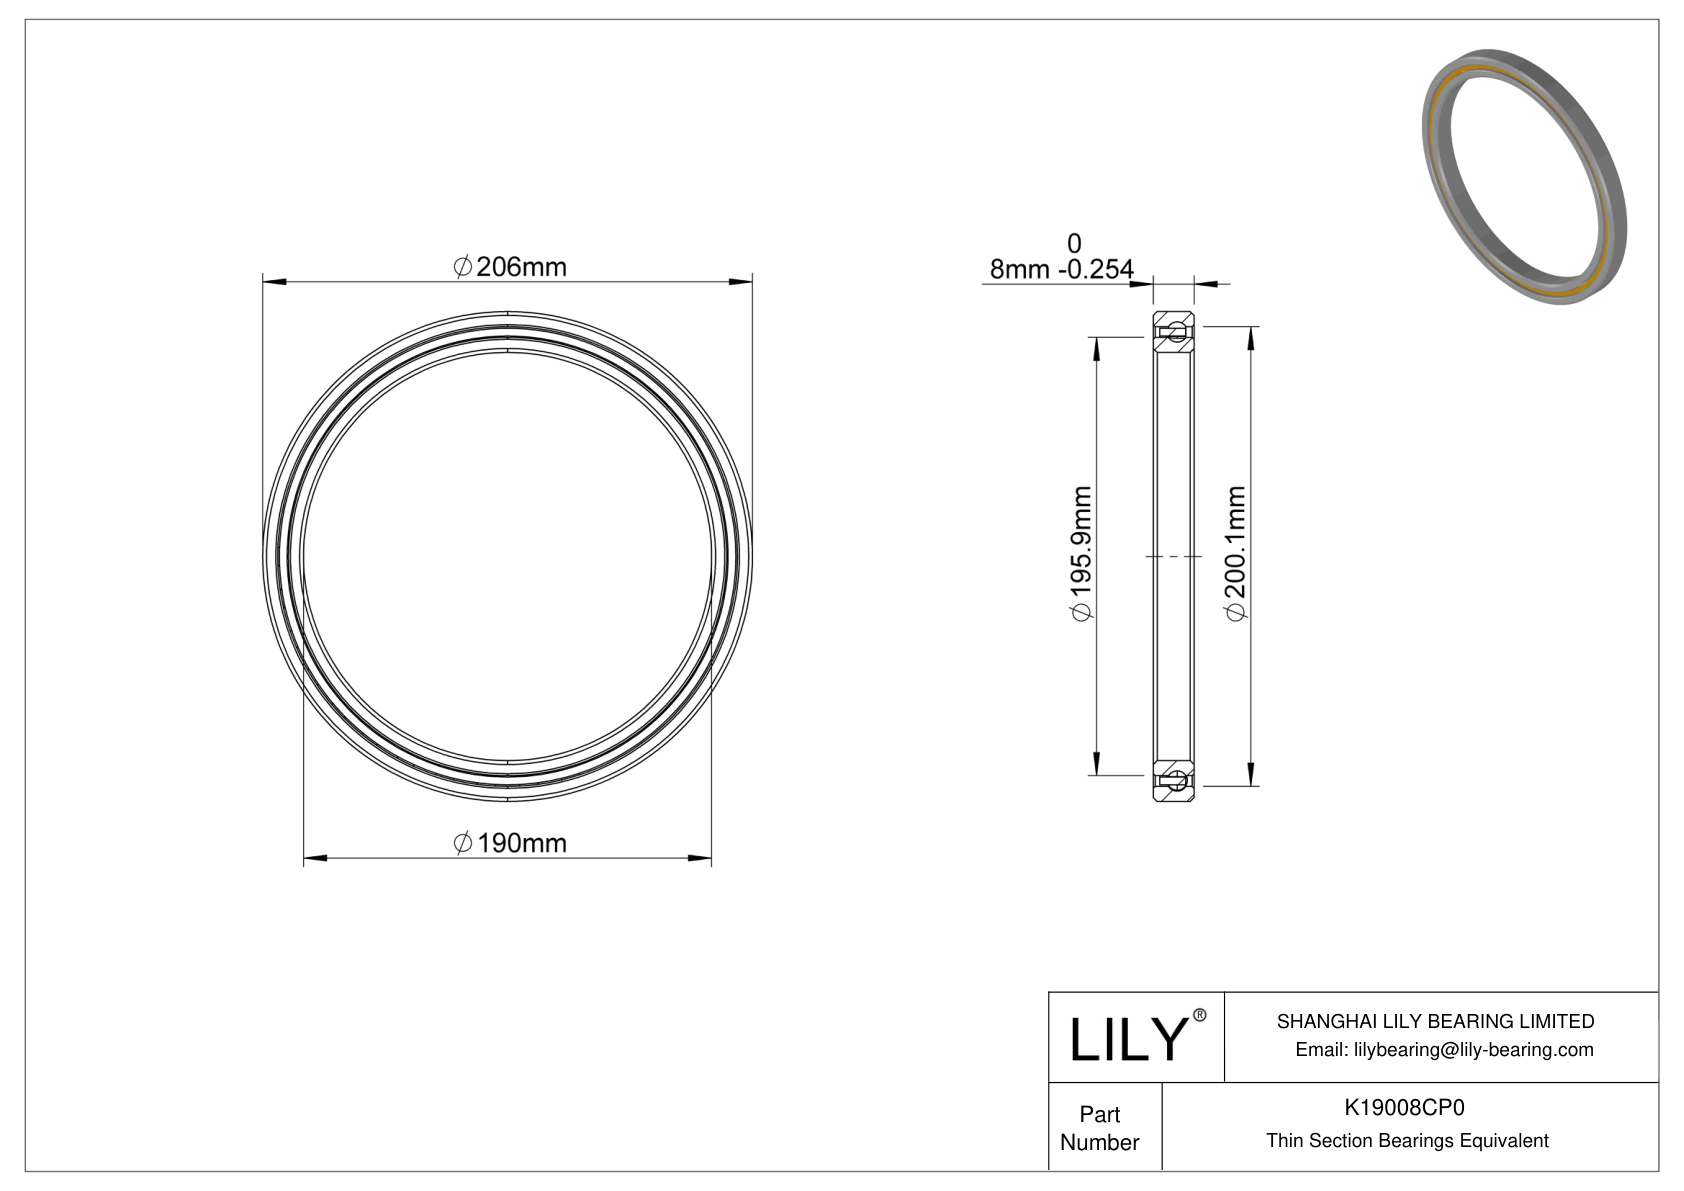 K19008CP0 Constant Section (CS) Bearings cad drawing